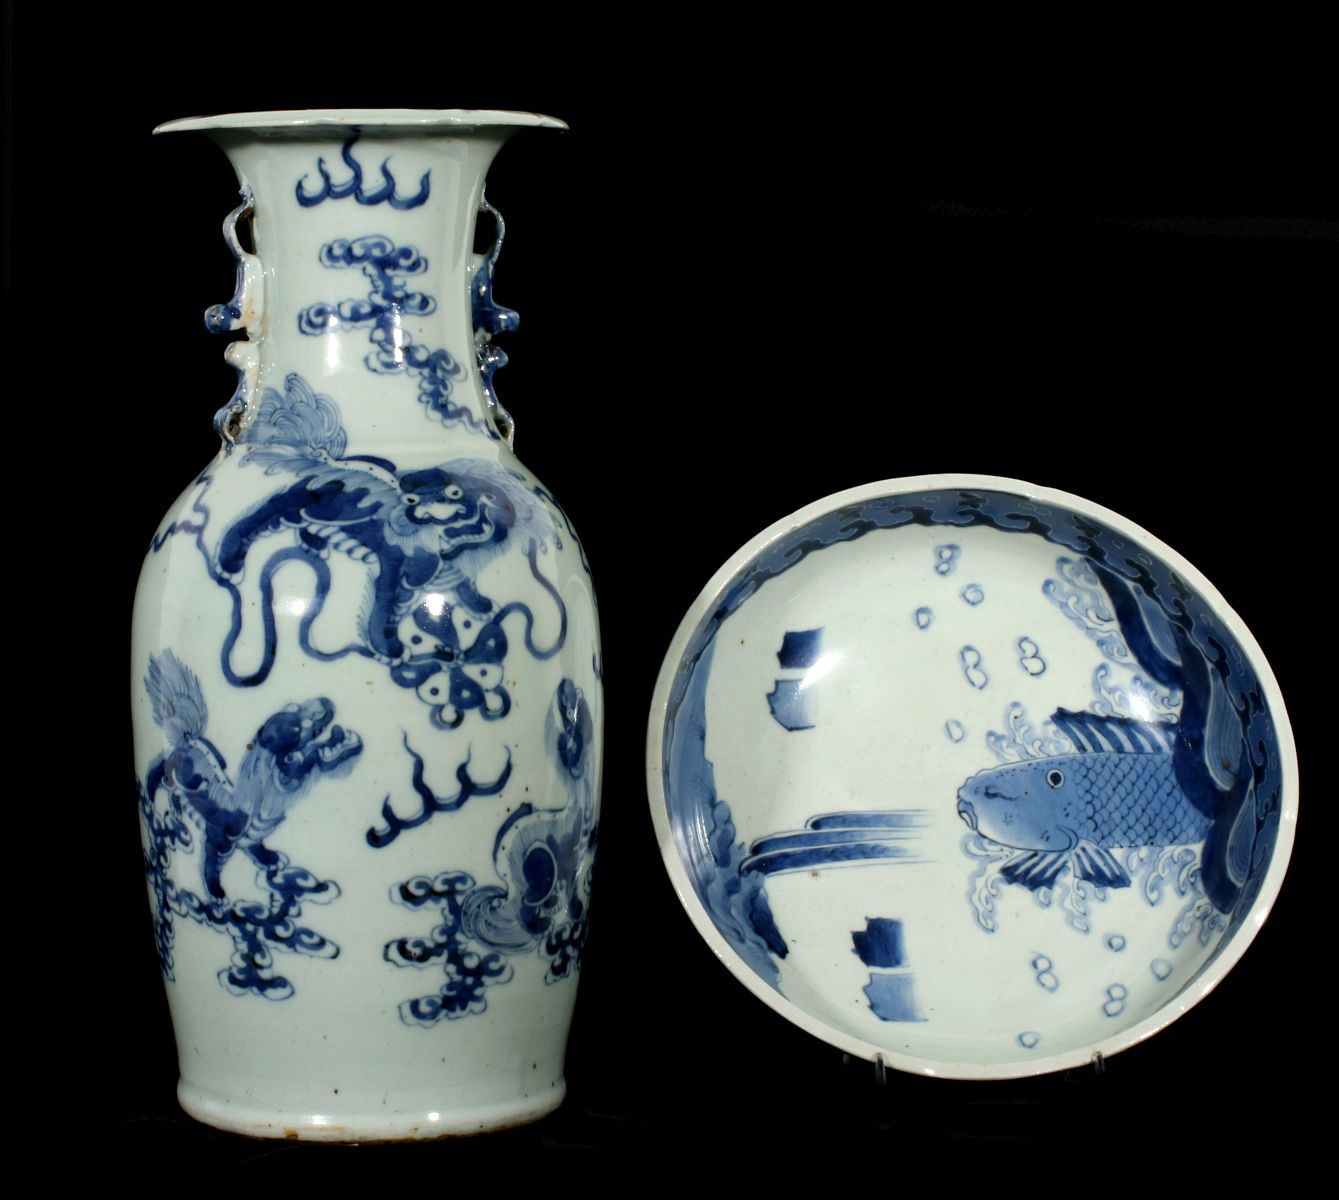 ANTIQUE CHINESE BLUE AND WHITE VASE AND BASIN